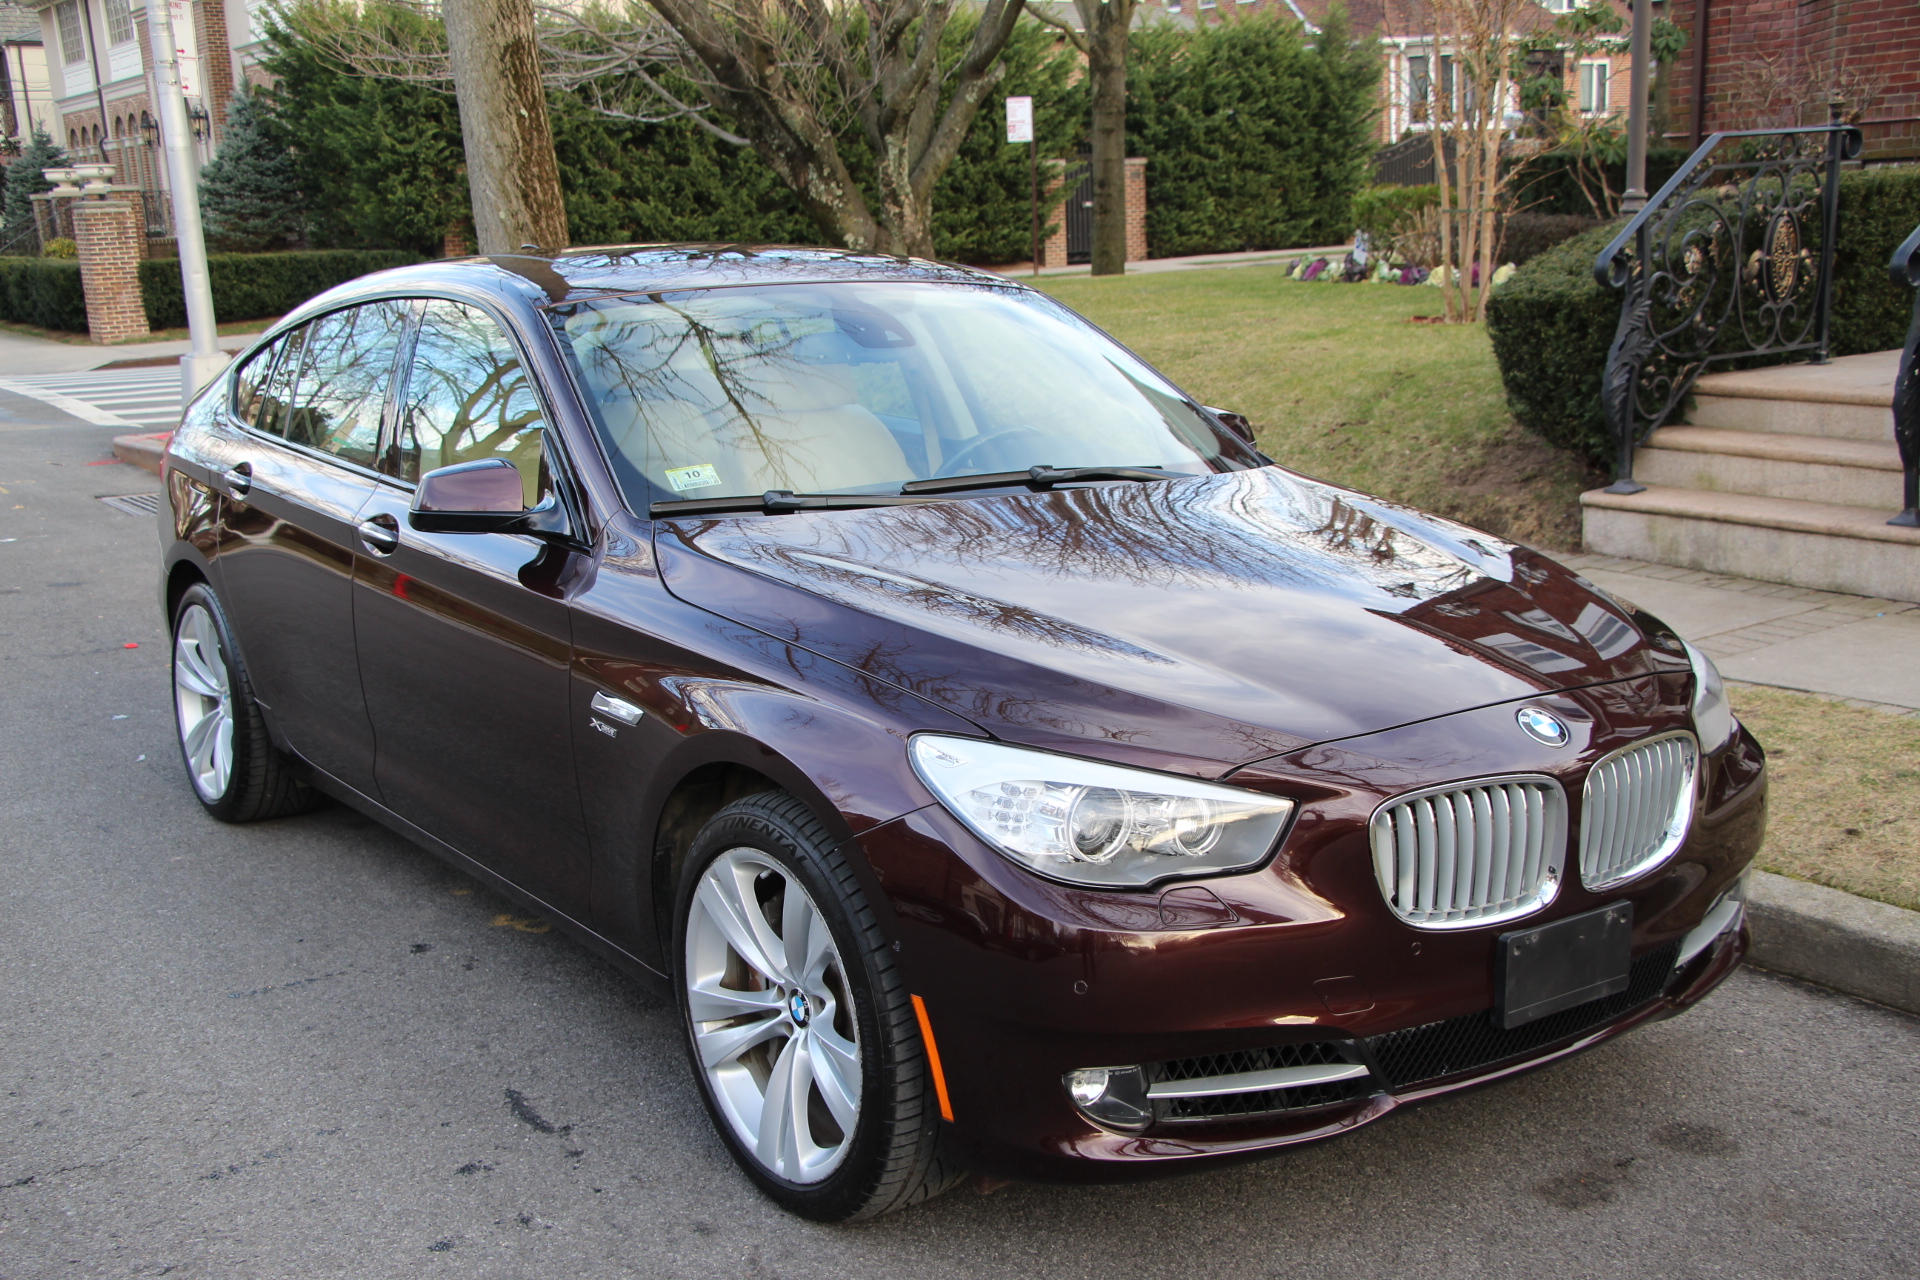 Buy Used 2012 BMW 550I XDRIVE GRAN TURISMO SPORT M for $16 900 from trusted  dealer in Brooklyn, NY!